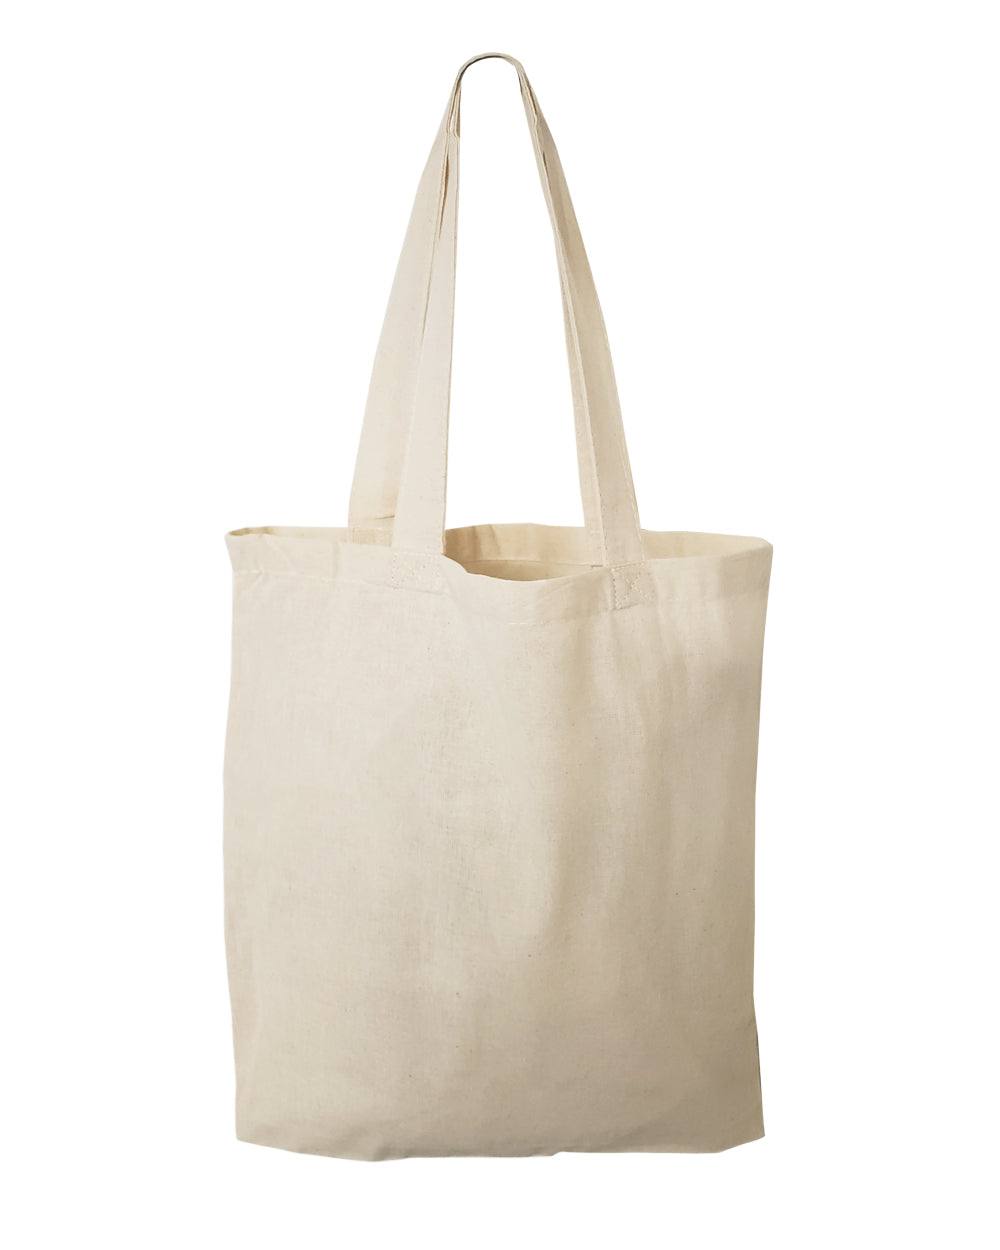 11 inch small tote bags, MINI favor Bag,Promotional small tote bags